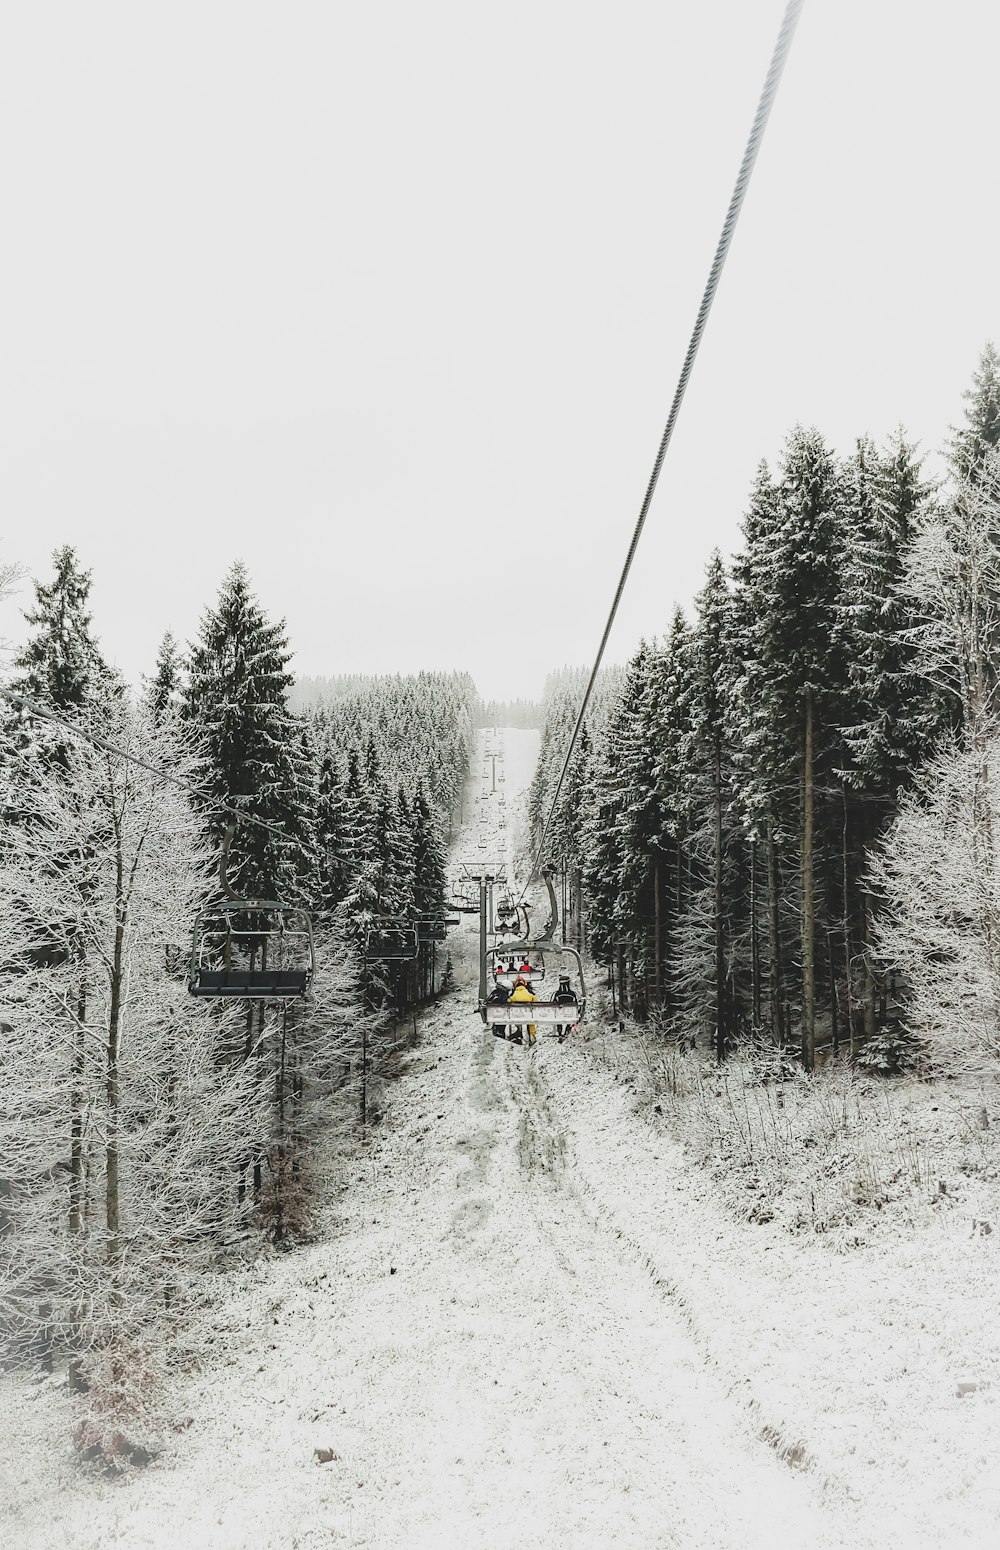 red and white cable car on snow covered ground